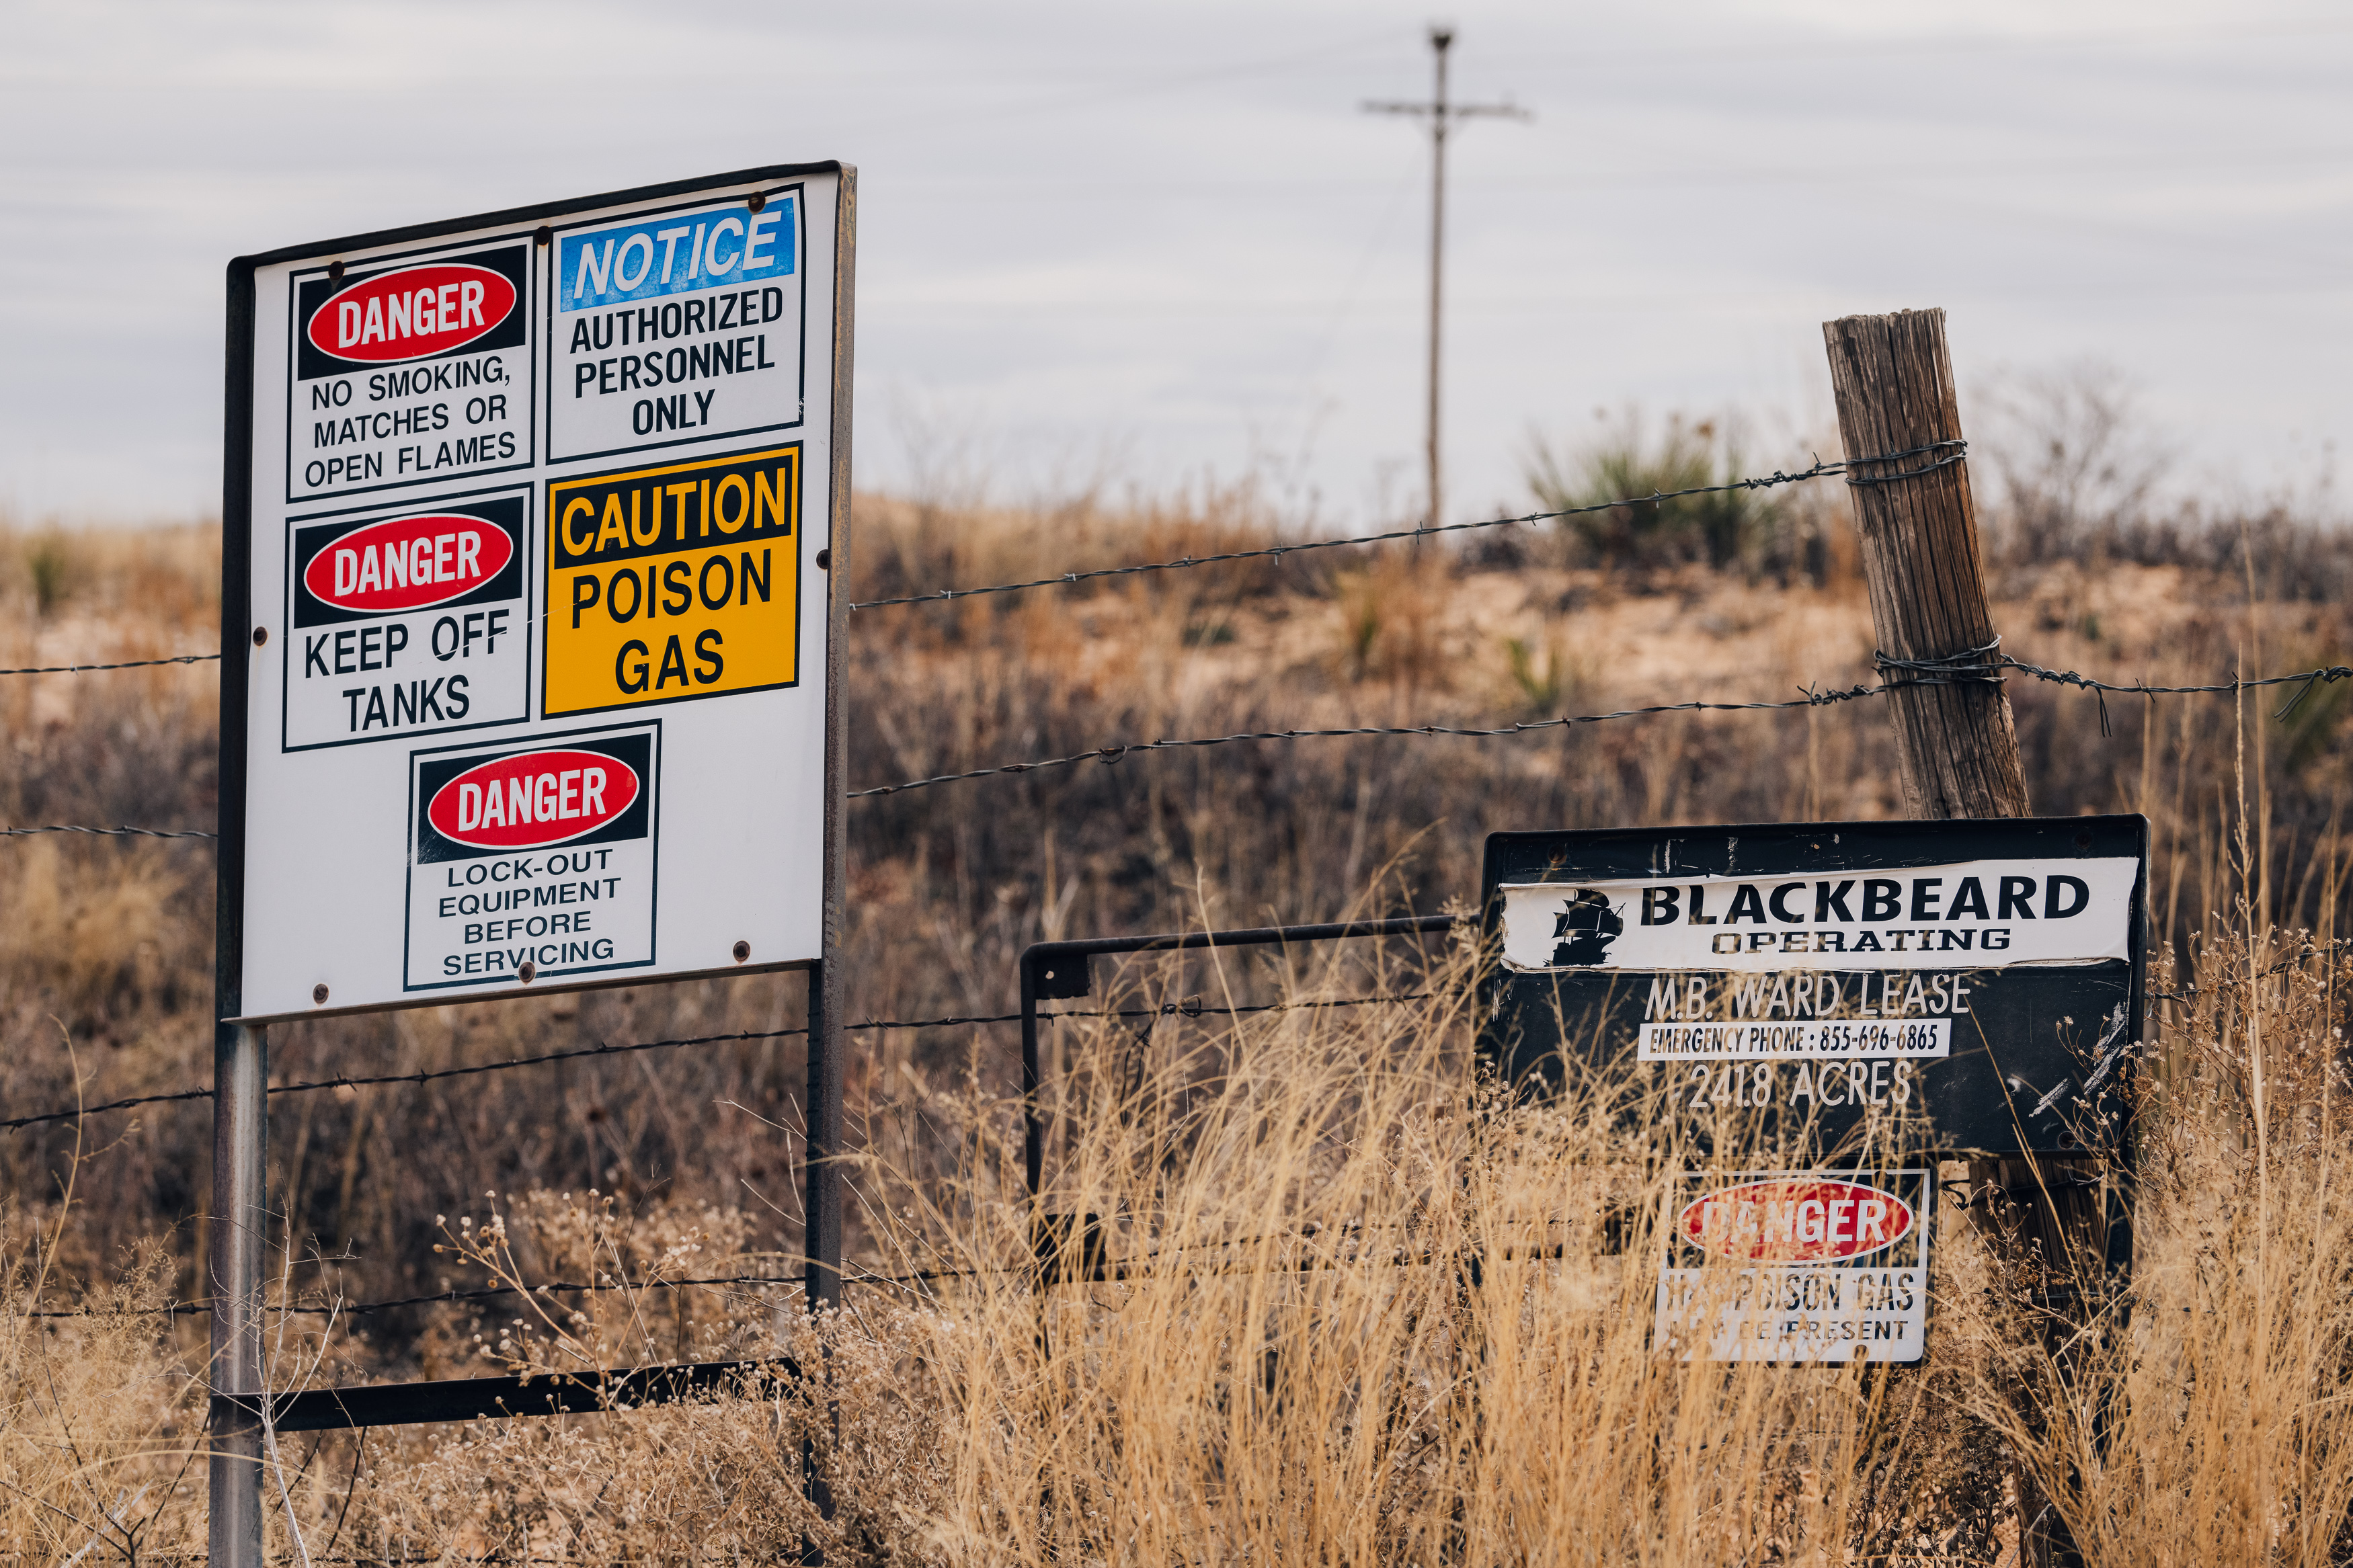 Danger signs about poison gas and flammability risks at an oil and gas site in the Permian